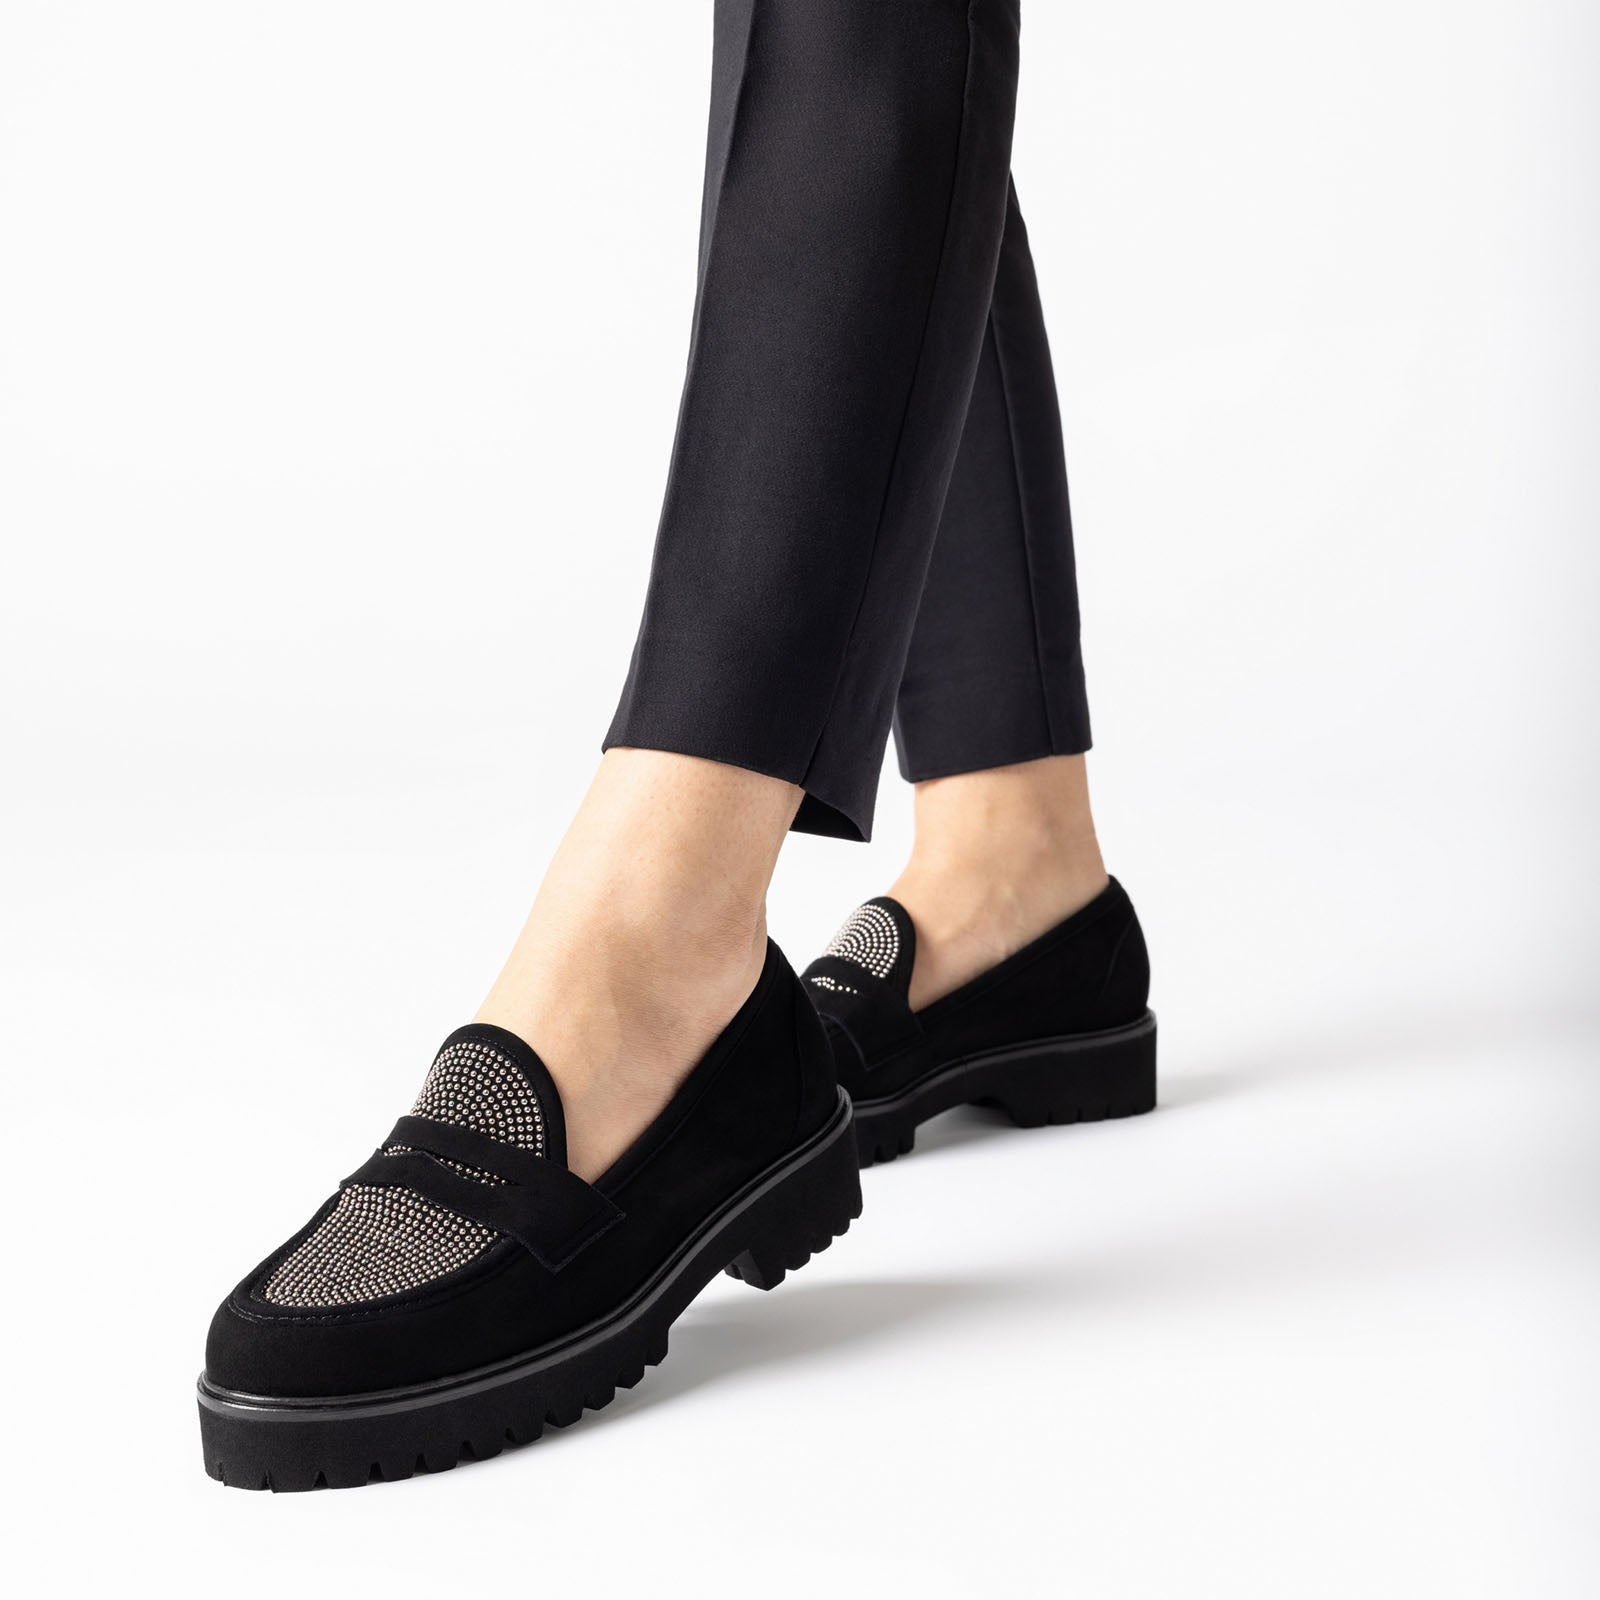 Women’s Flats, Pumps, Loafers and More | Jon Josef